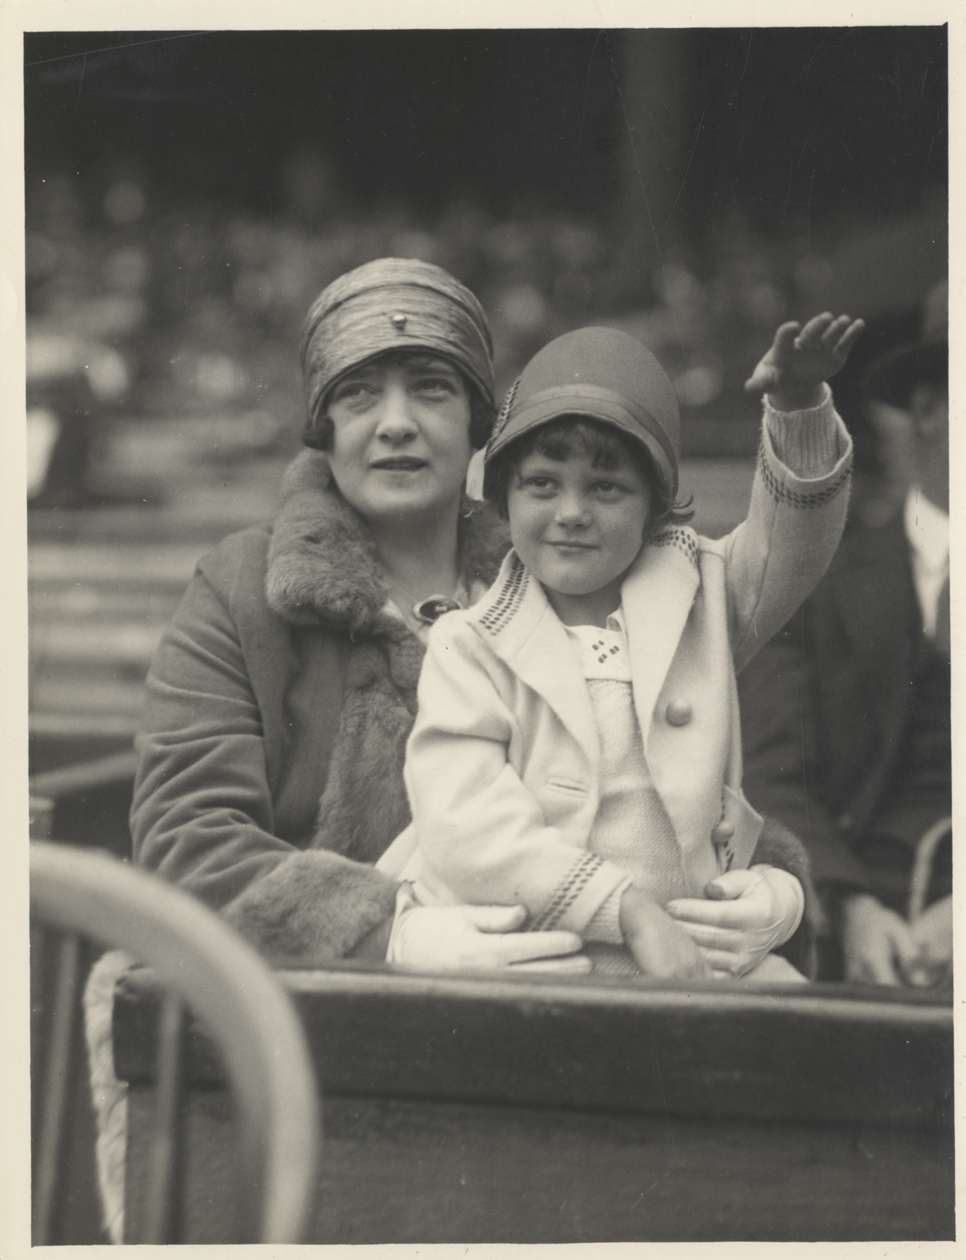 Babe Ruth's first wife Helen and daughter Dorothy